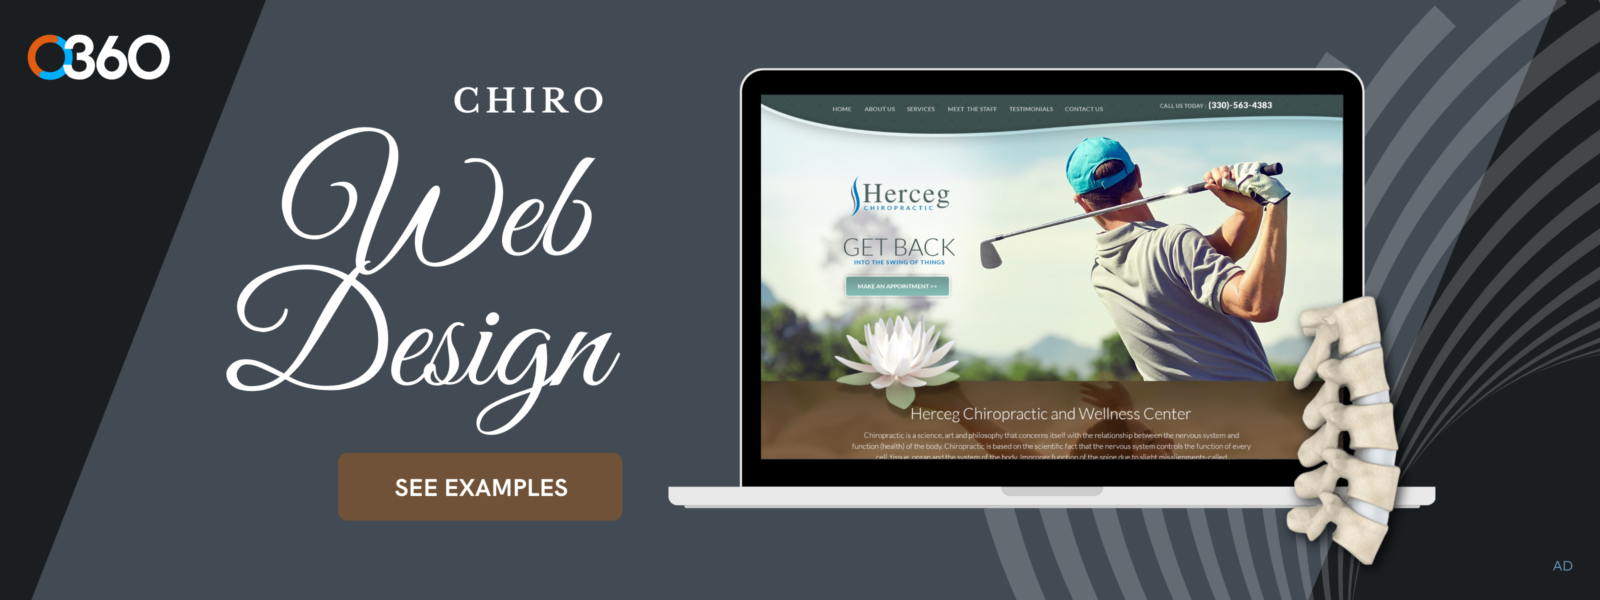 Chiropractic Website Design Ad By O360